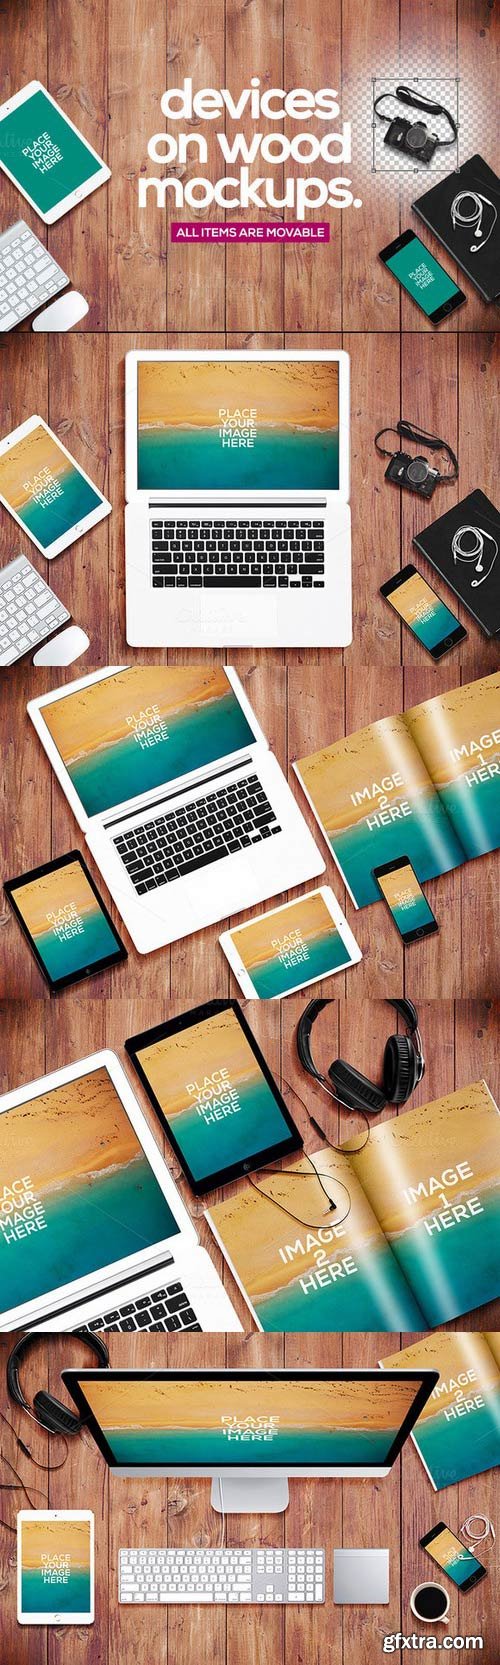 CM - Devices On Wood - Mockups 354370